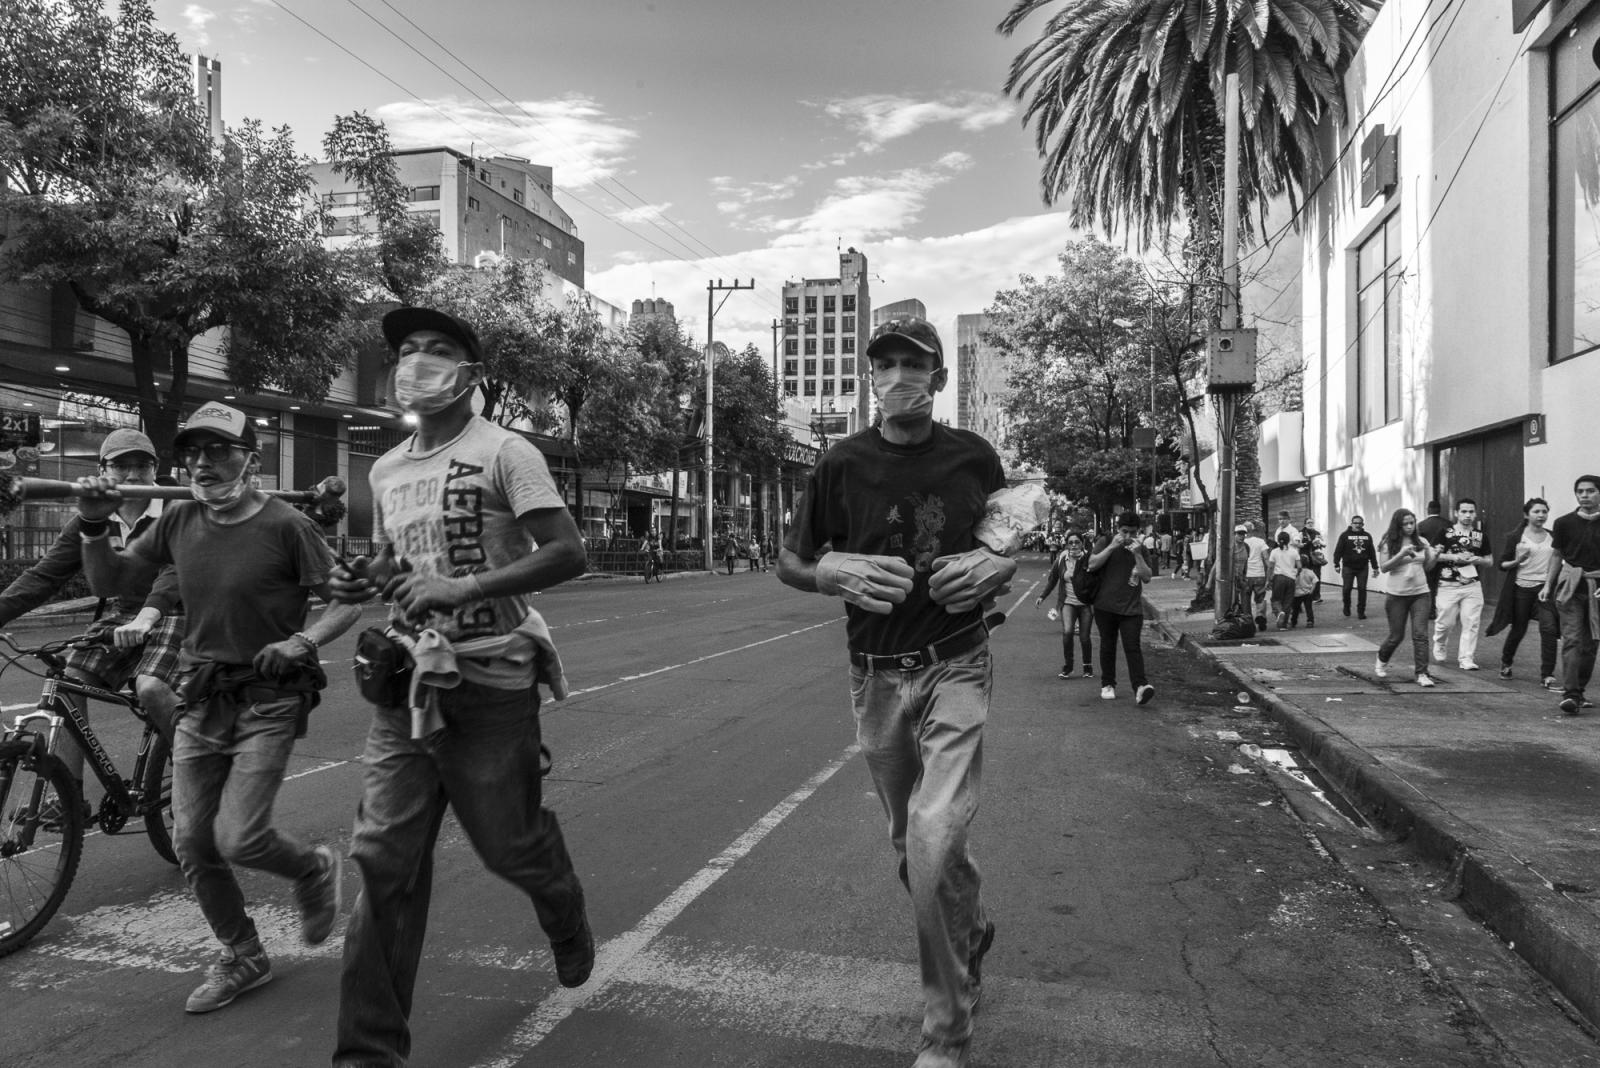 People run through the streets ...escue work. September 19, 2017.